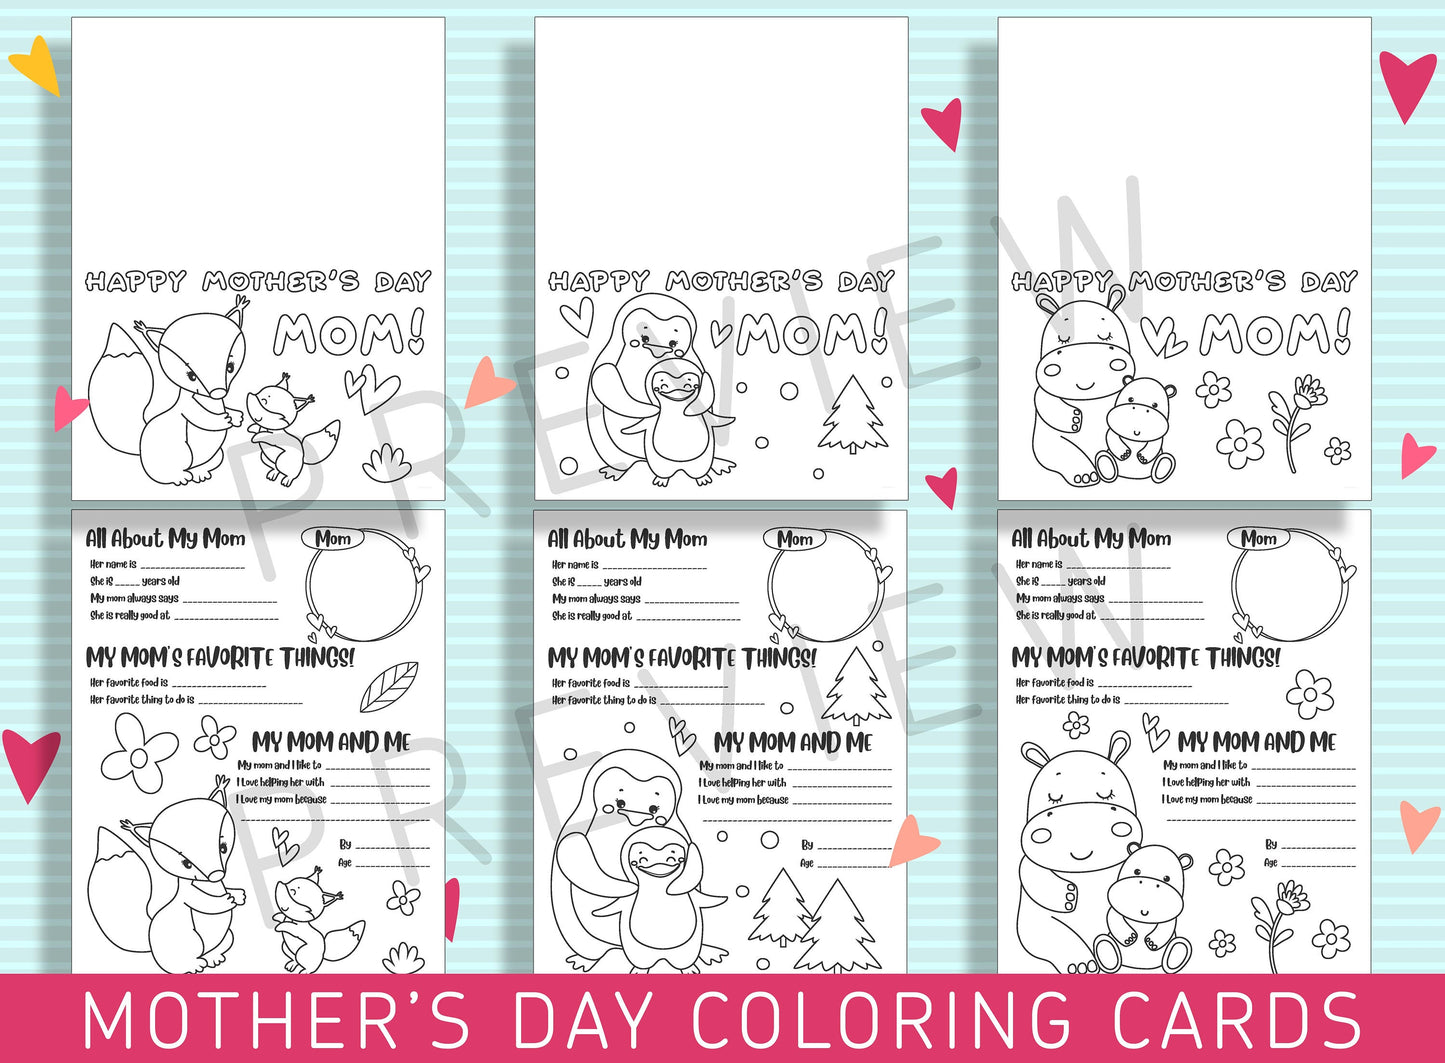 Color Your Love for Mom: Printable Mother's Day Coloring Cards, 6 Designs, PDF File, Instant Download